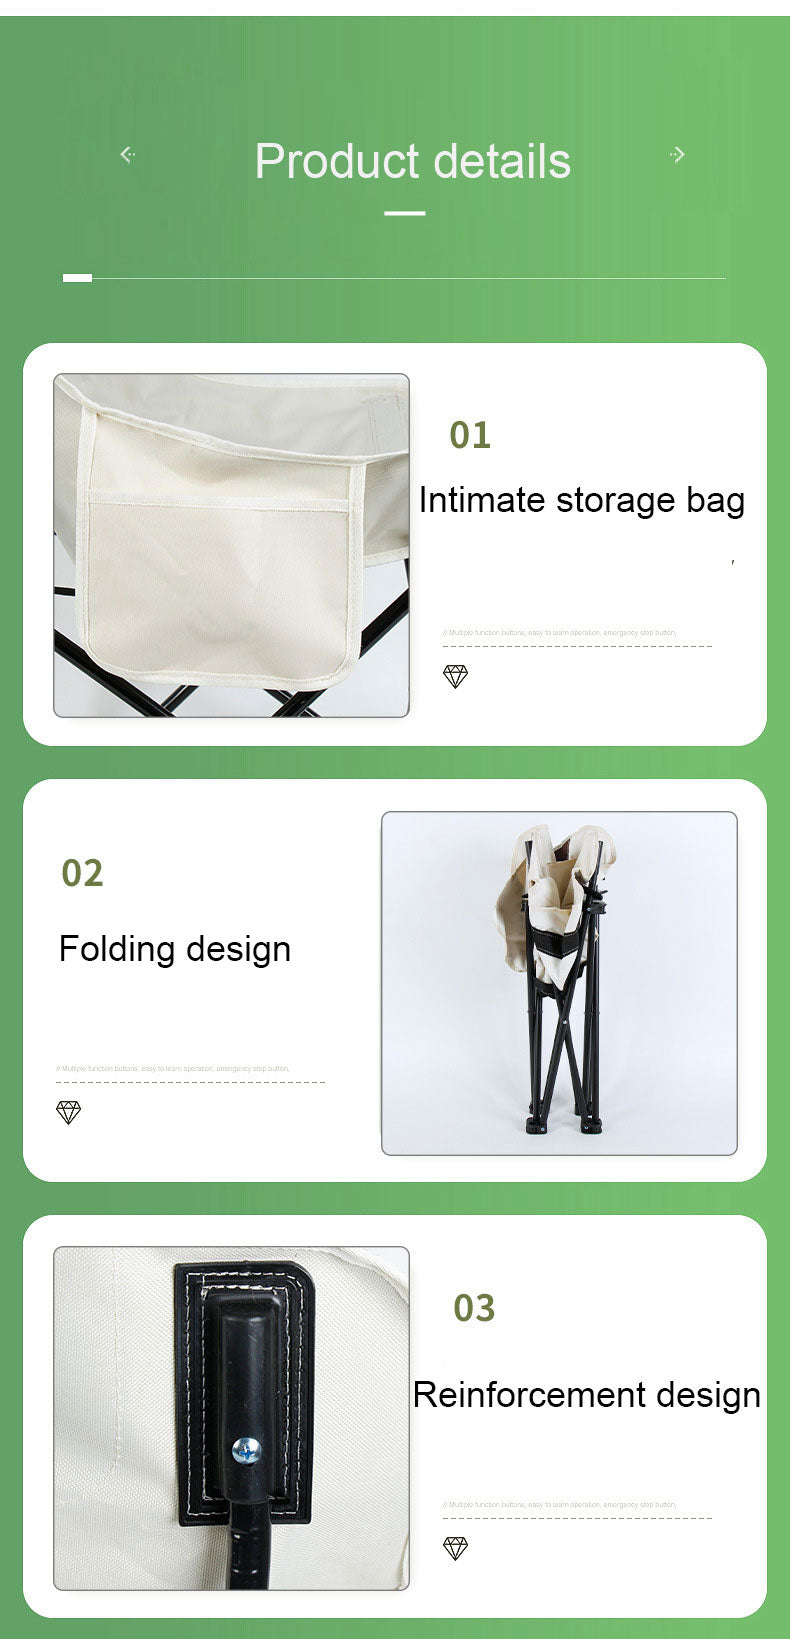 Load image into Gallery viewer, ZlCamp Lazy Outdoor Folding Moon Chair, camping/tourism/fishing/barbecue/sketching
